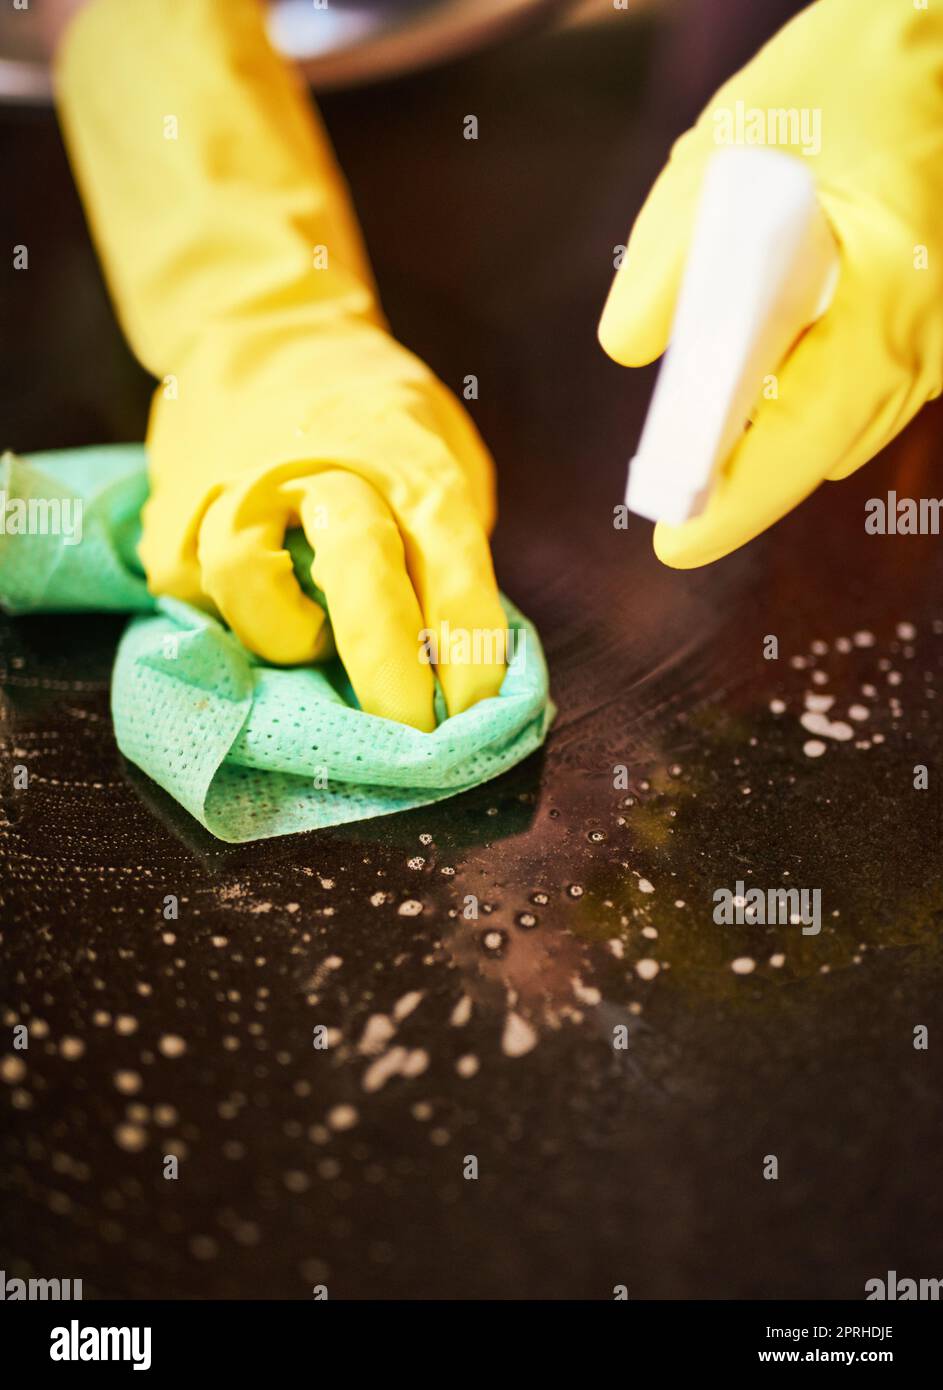 Spraying and scrubbing to a spotless surface. Closeup shot of a person cleaning a kitchen surface. Stock Photo